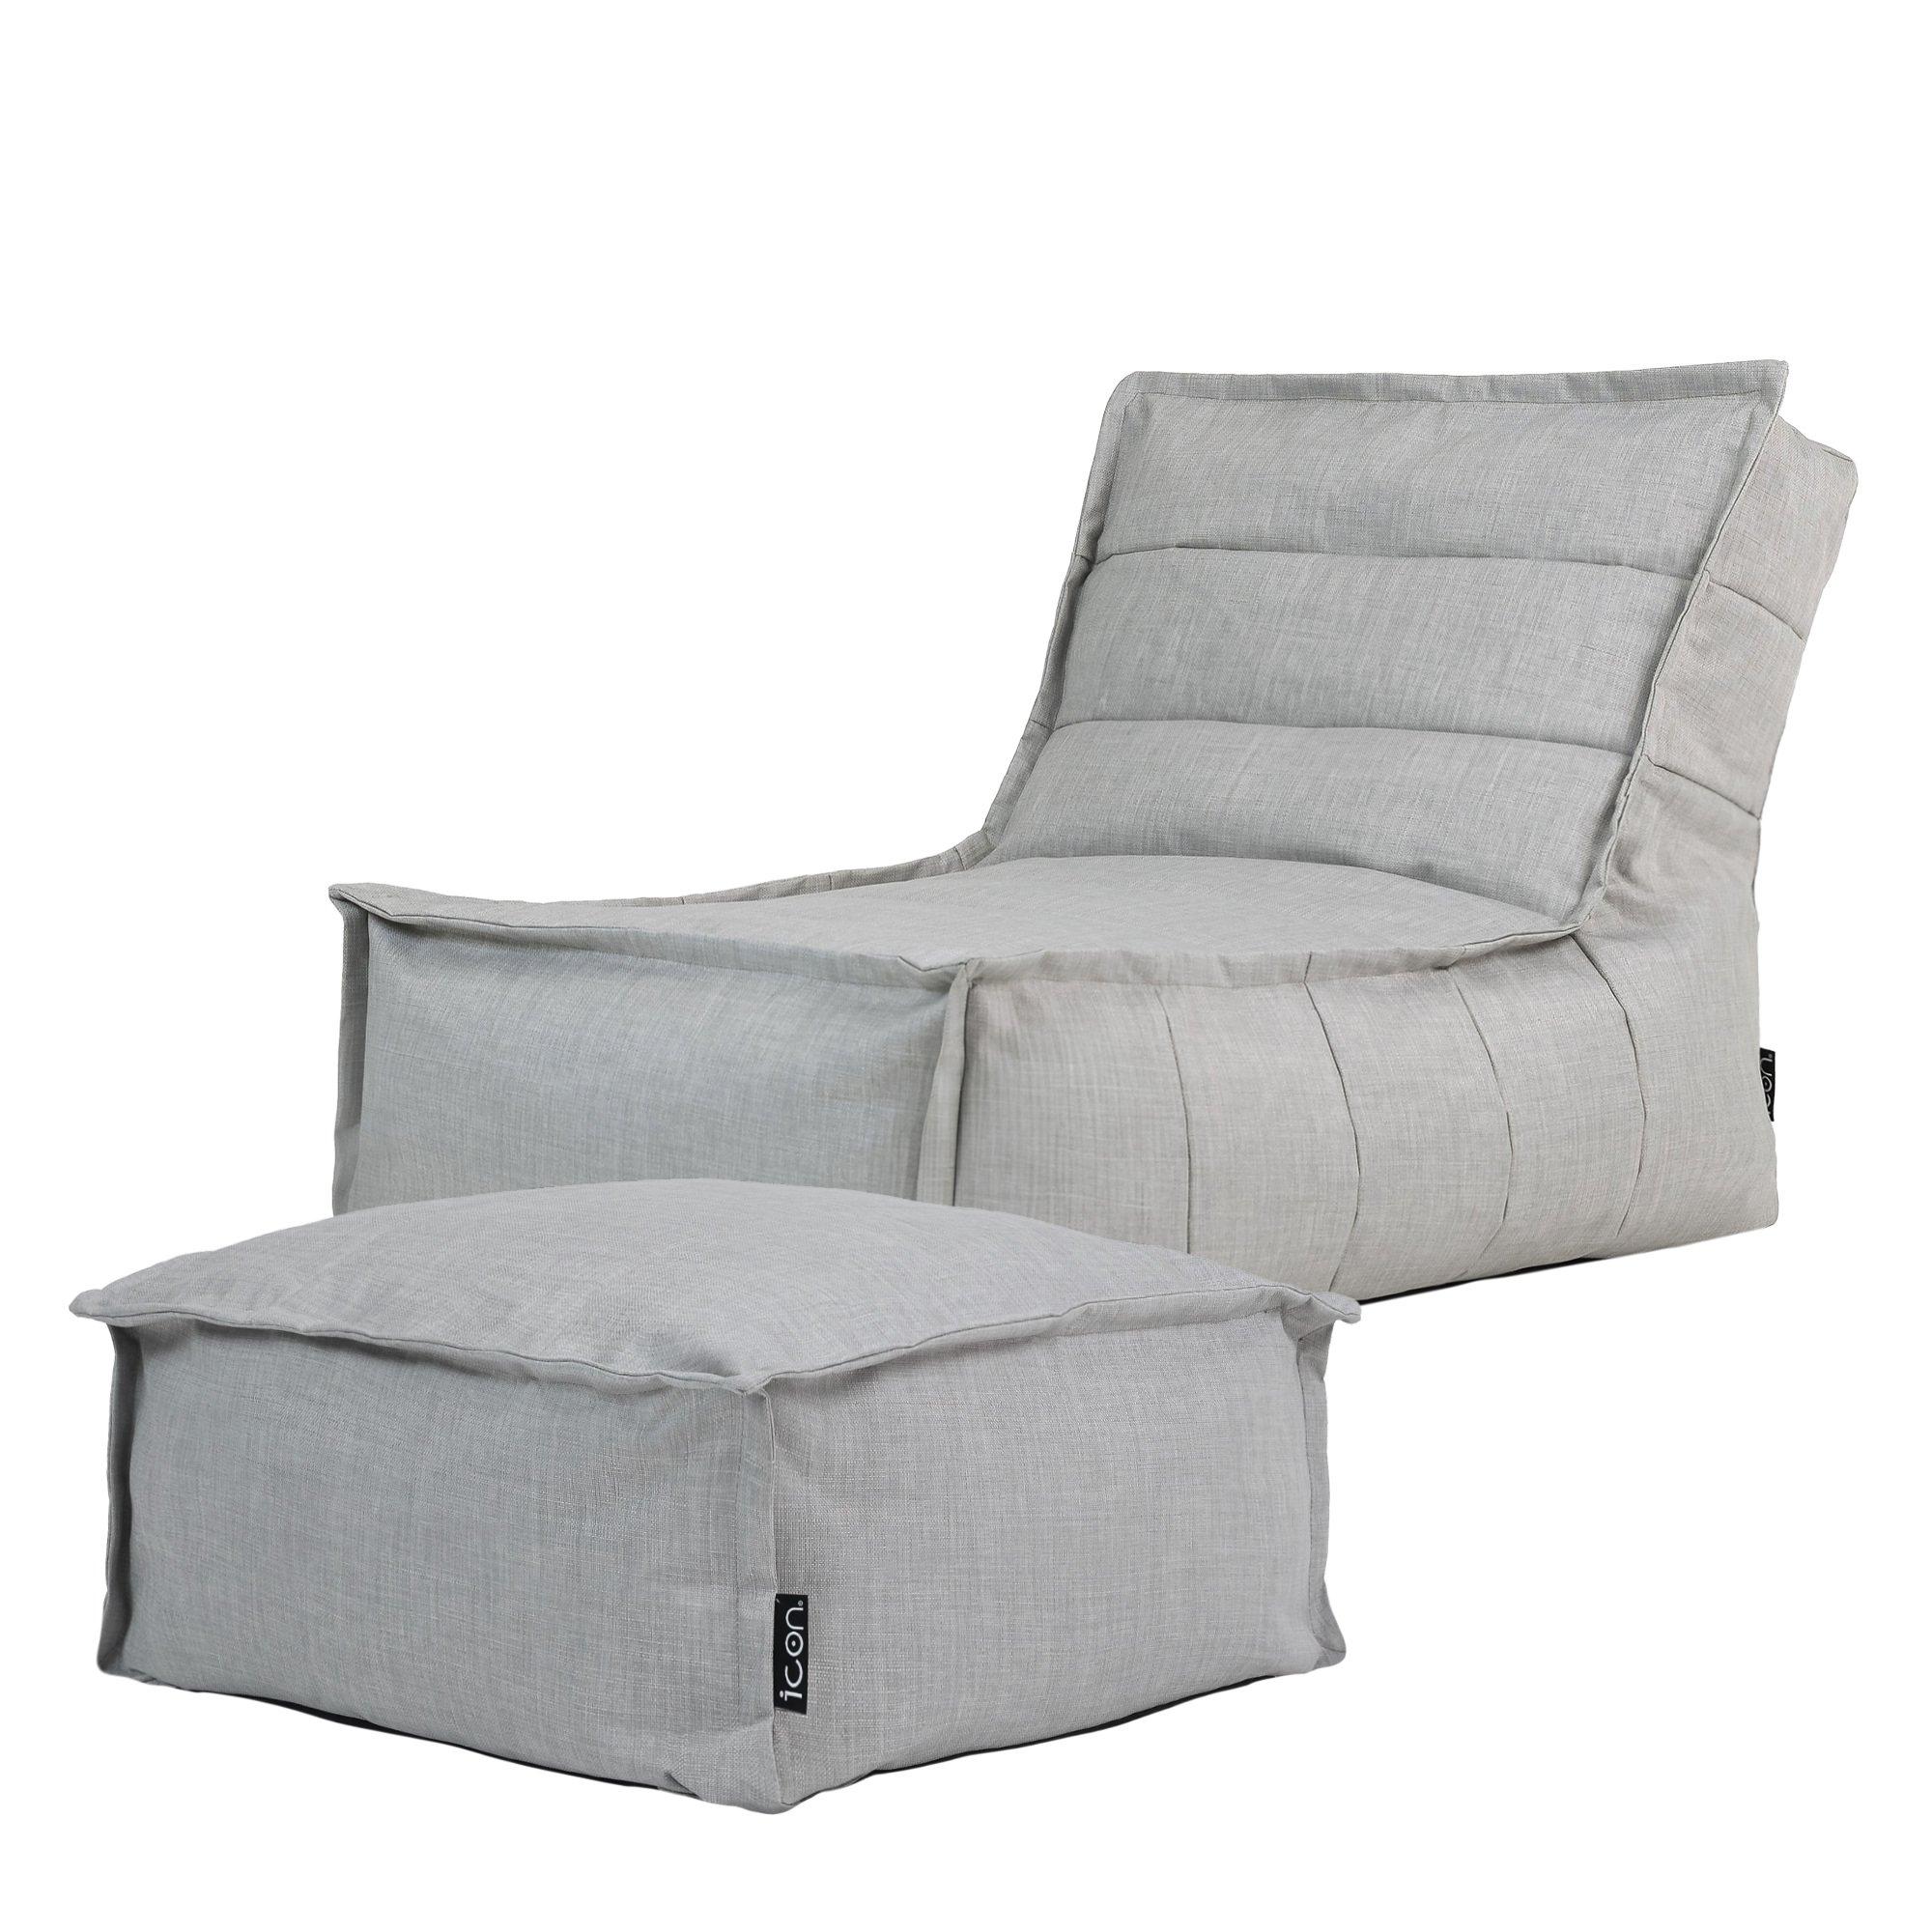 Dolce Indoor Outdoor Bean Bag Lounger and Footstool Grey Patio Chairs